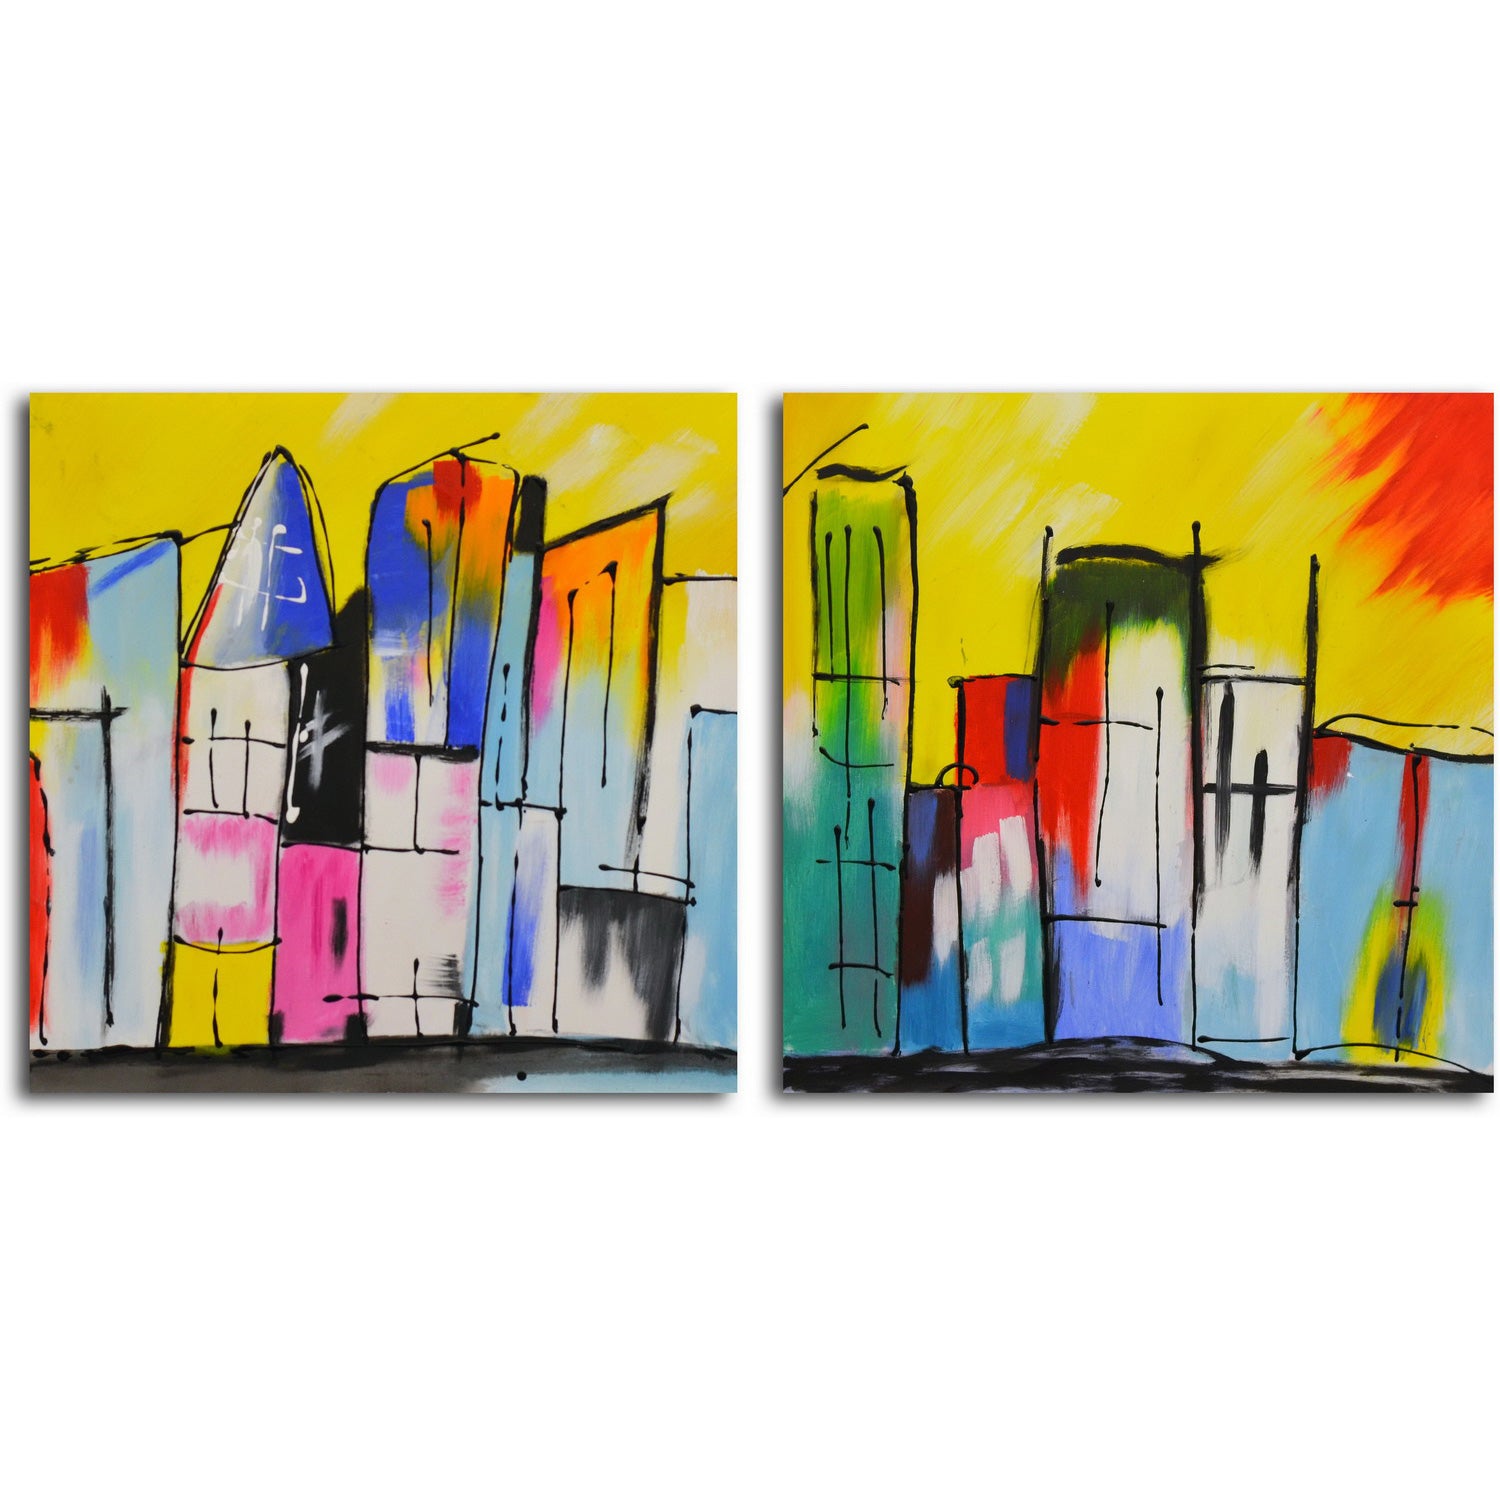 "House of a Different Color" Original painting on canvas - Set of 2